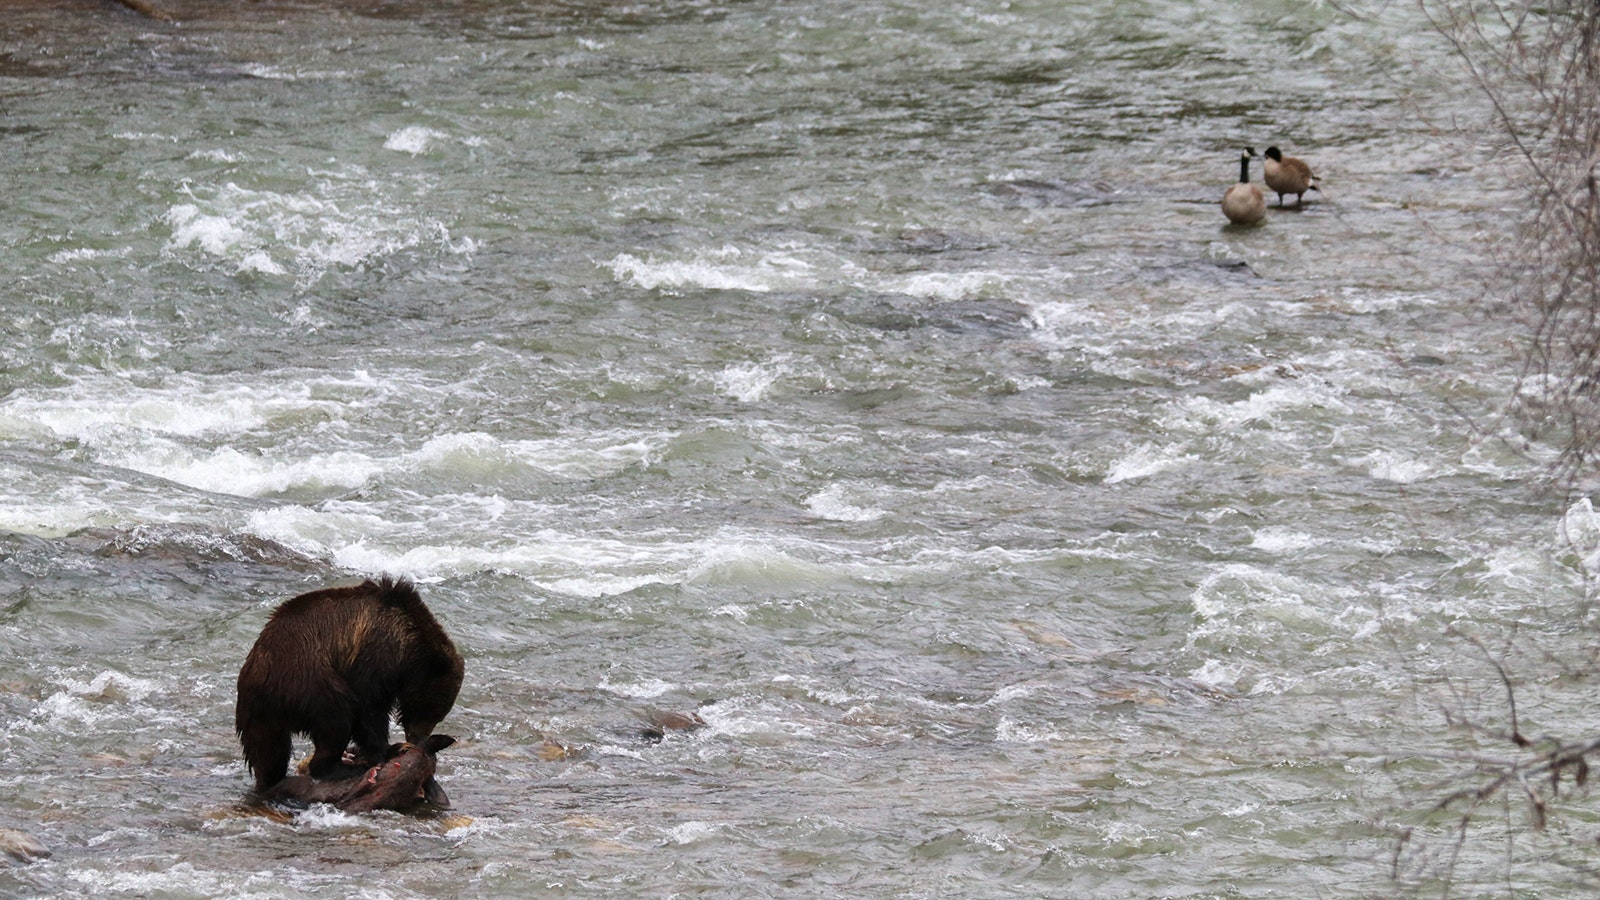 A young male grizzly bear devoured a large game carcass he found in the middle of the Hoback River. Luckily for him, no other grizzlies showed up to try and steal it.